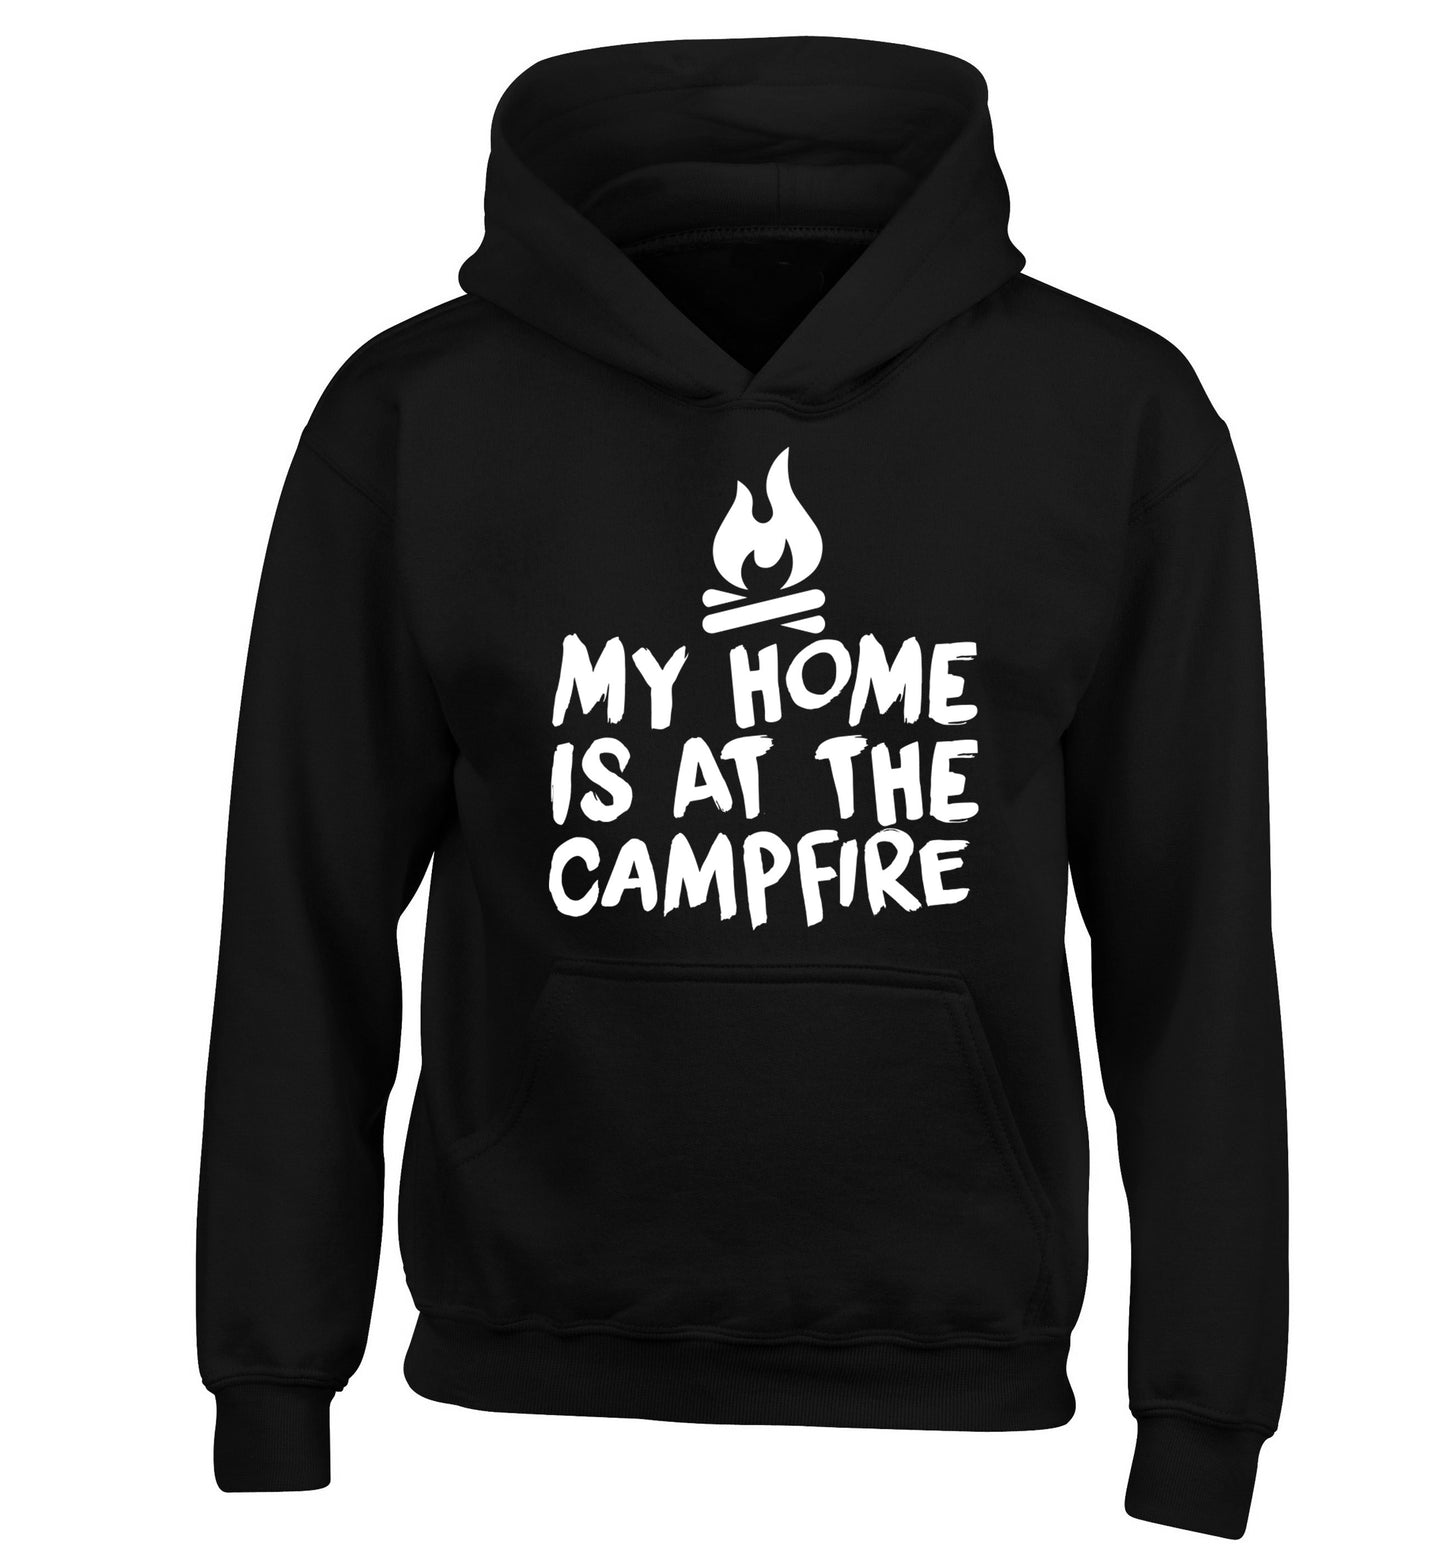 My home is at the campfire children's black hoodie 12-14 Years